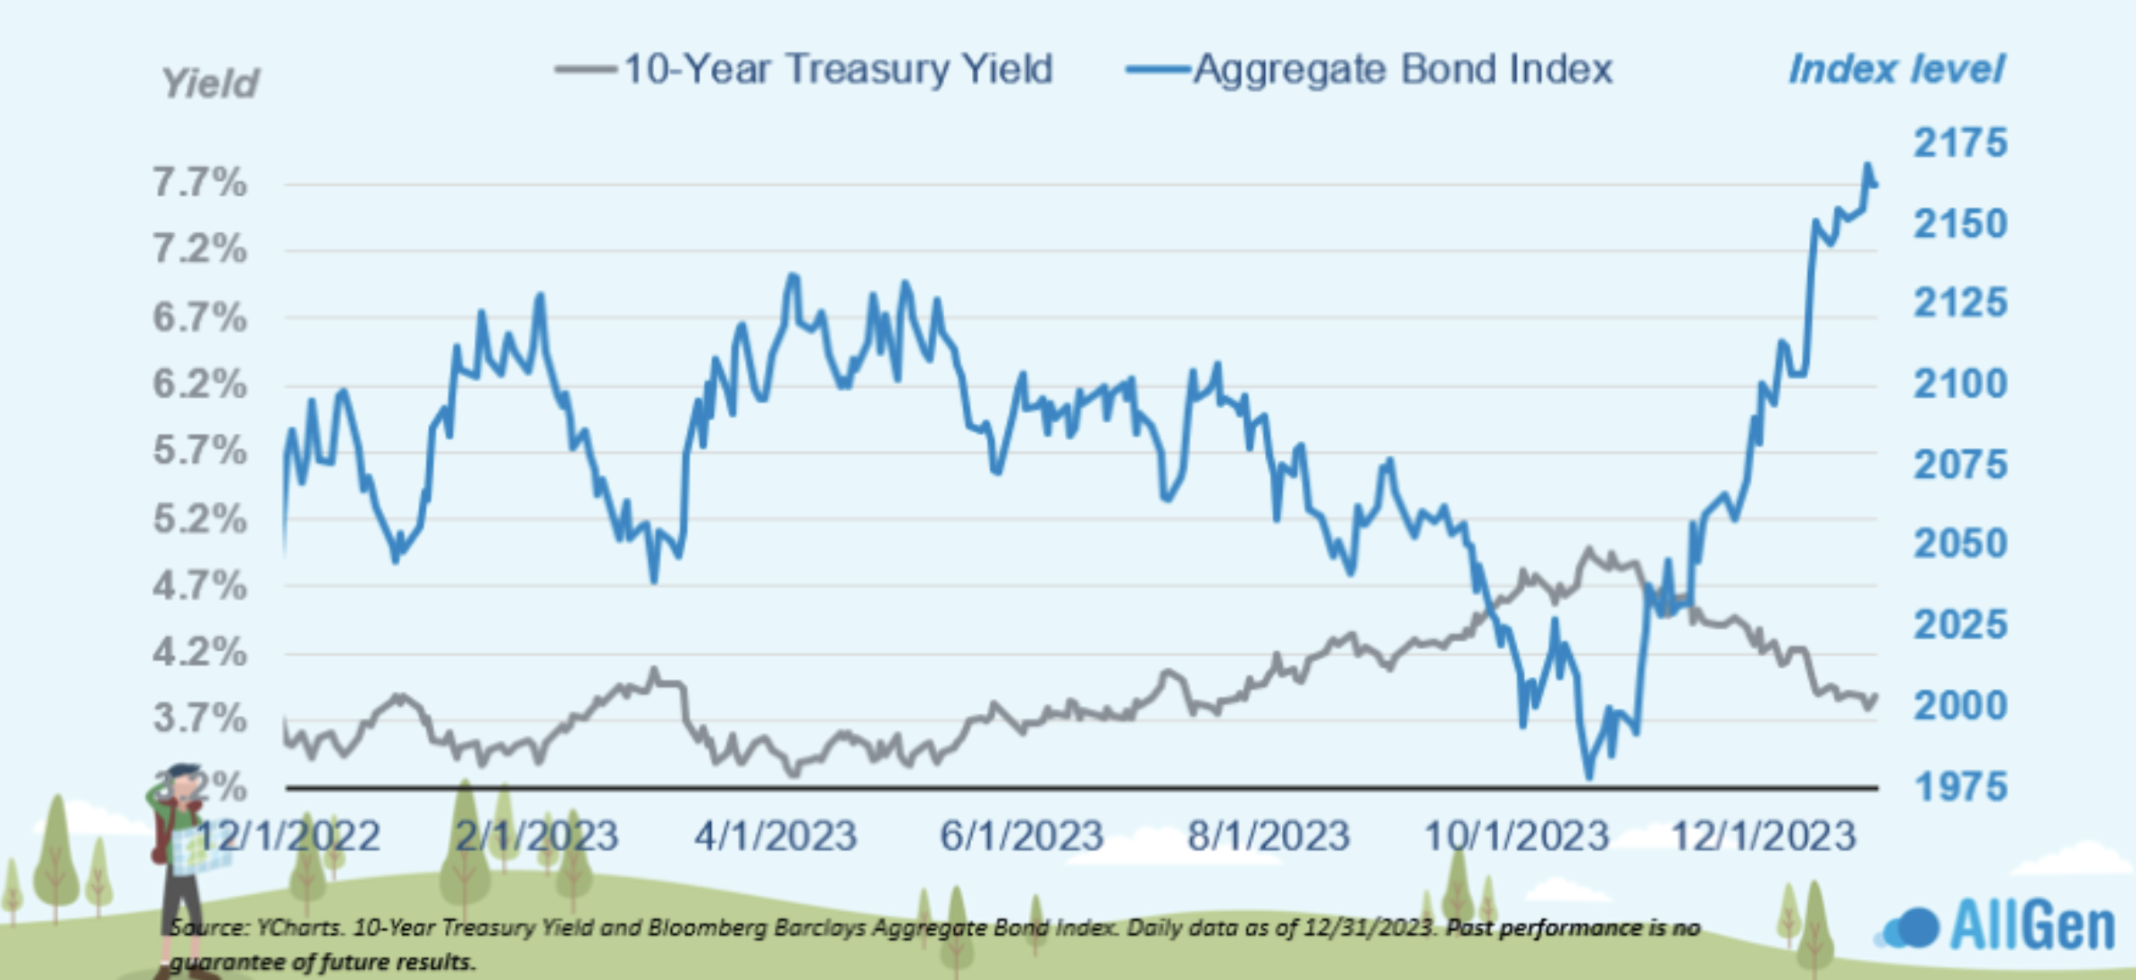 A chart displaying the inverse relationship between treasury yield and aggregate bond index over time.